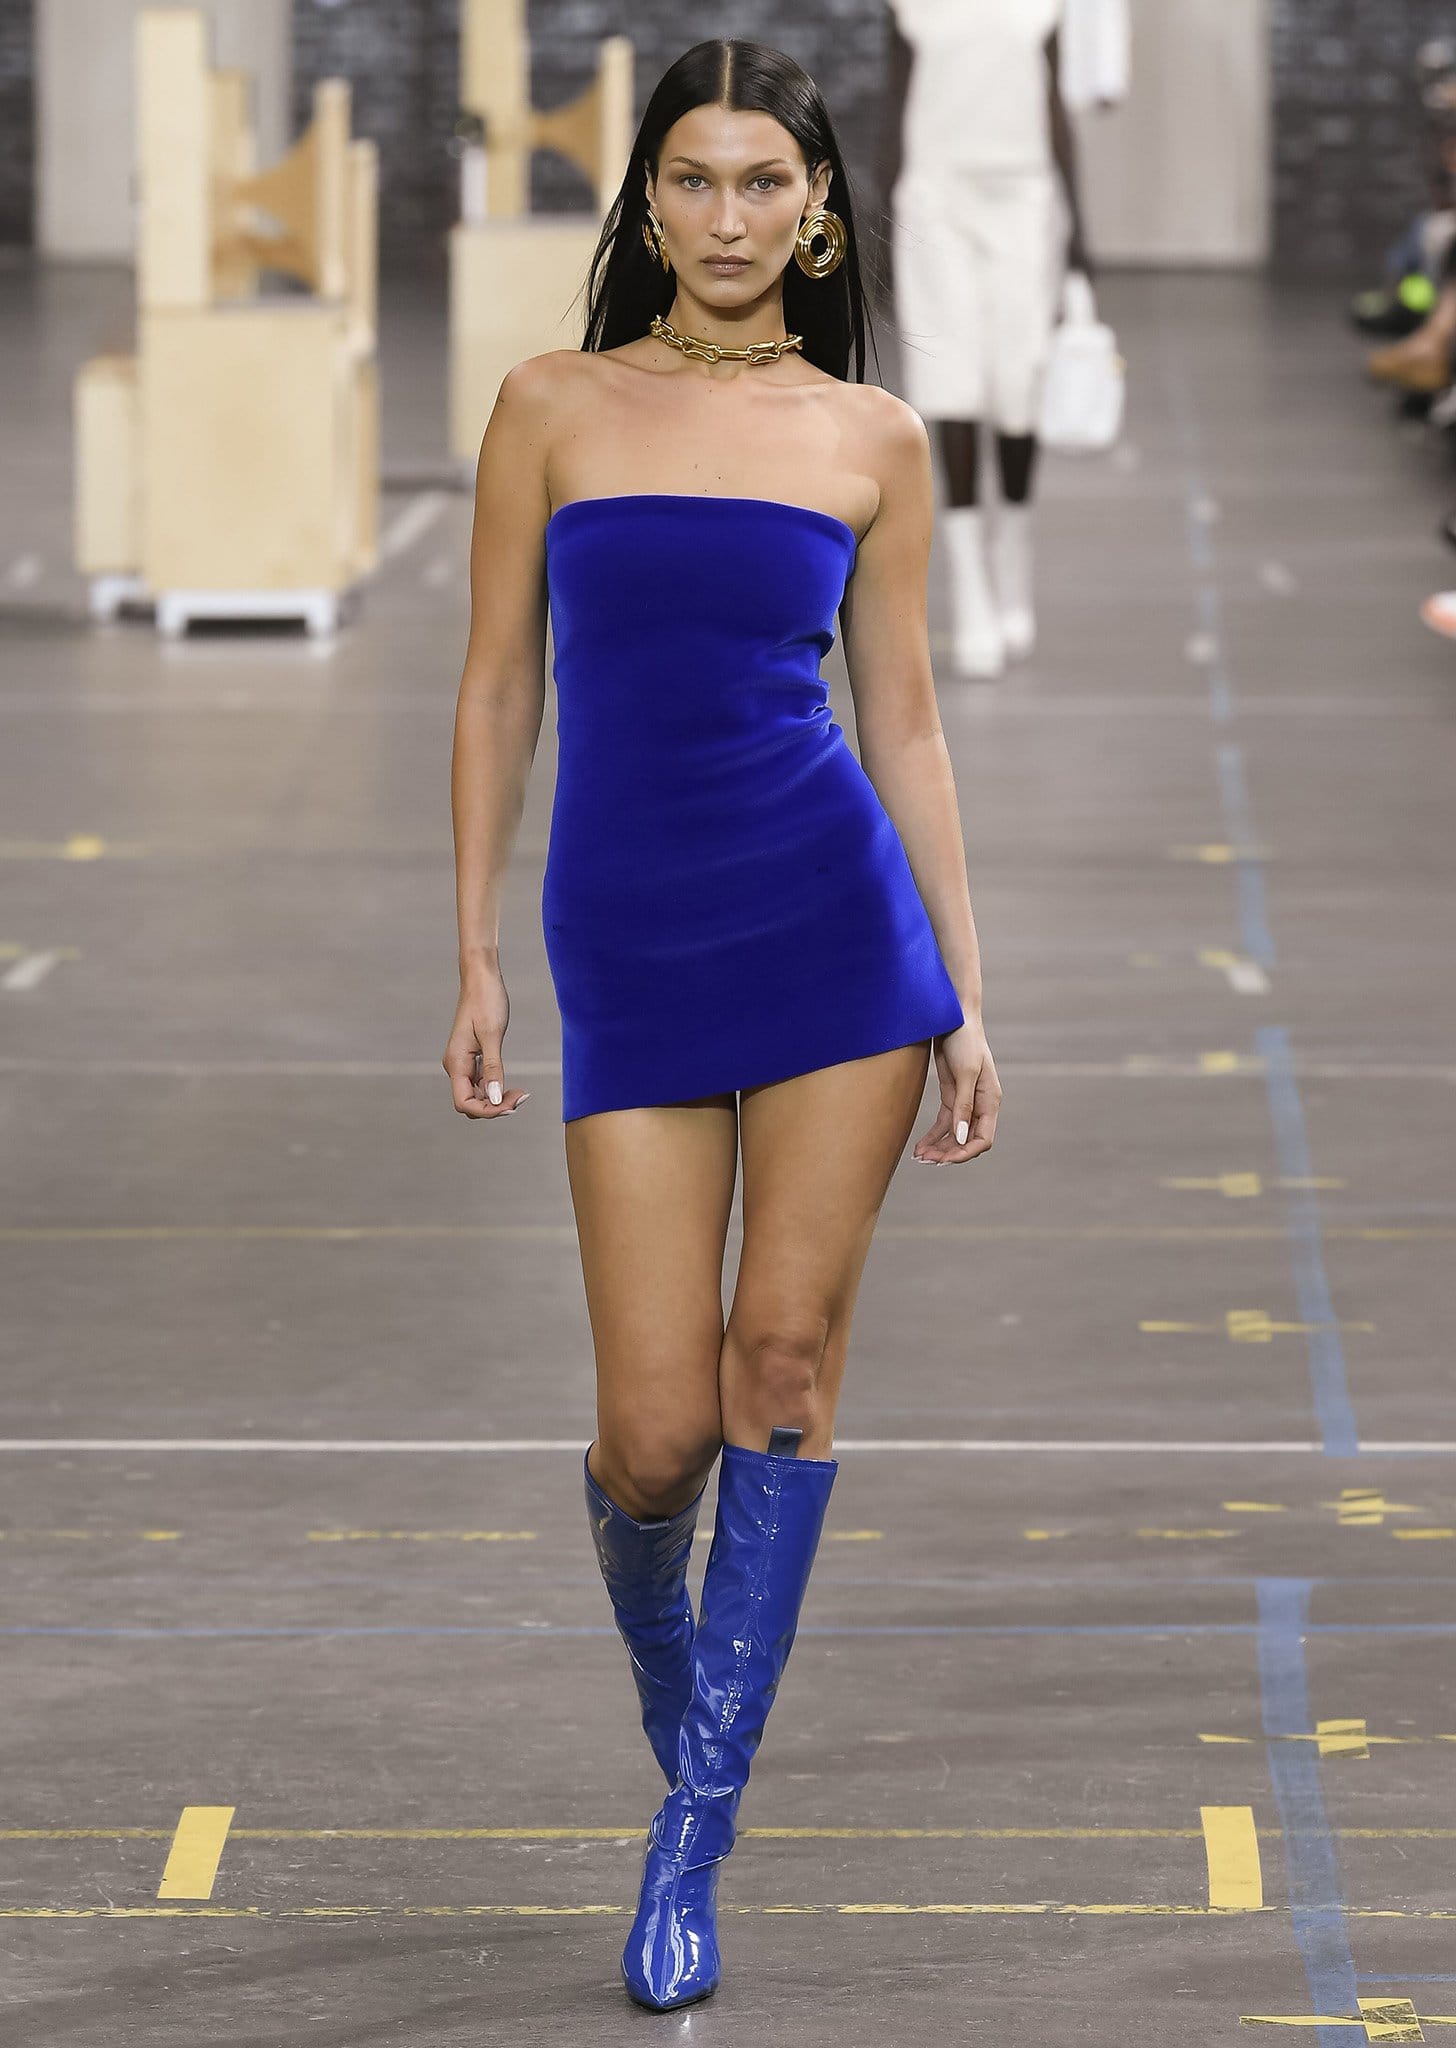 Bella Hadid walks for Virgil Abloh's Off-White collection in a blue velvet mini dress and blue PVC boots during Paris Fashion Week on July 4, 2021